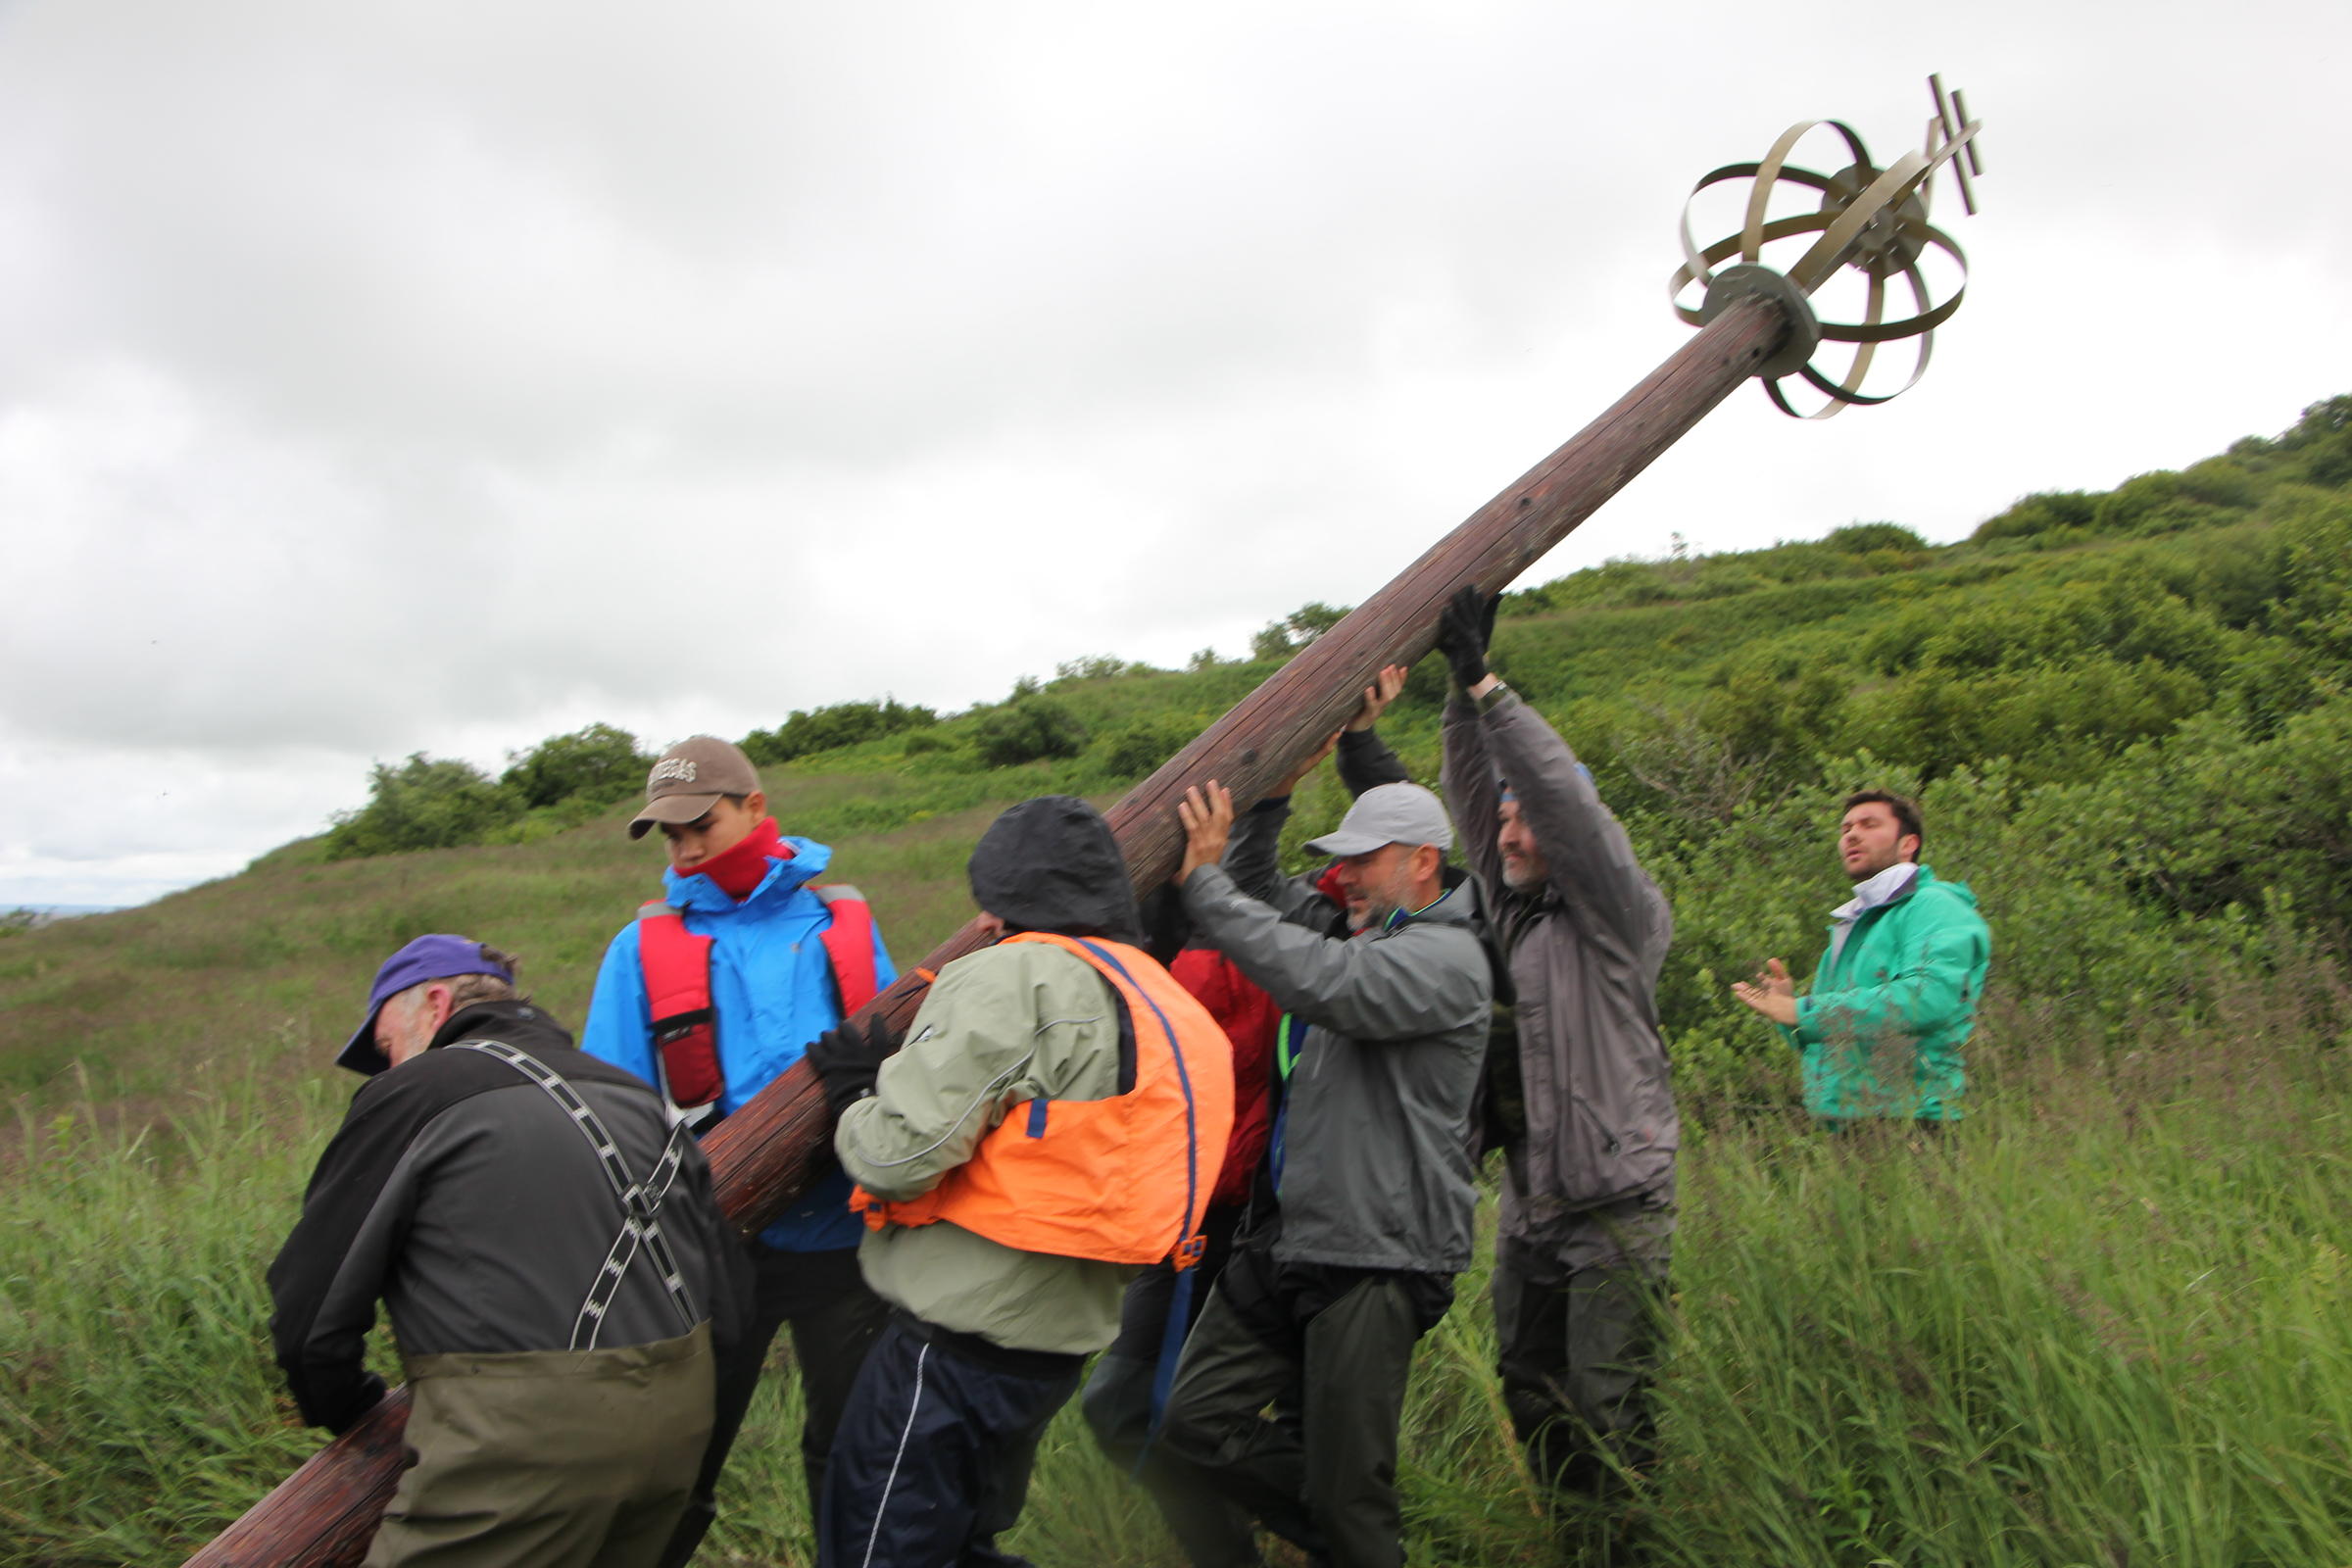 Members of the Russian expedition and Dillingham locals work to erect the monument at Nushagak. (Photo by Allison Mollenkam/KDLG)